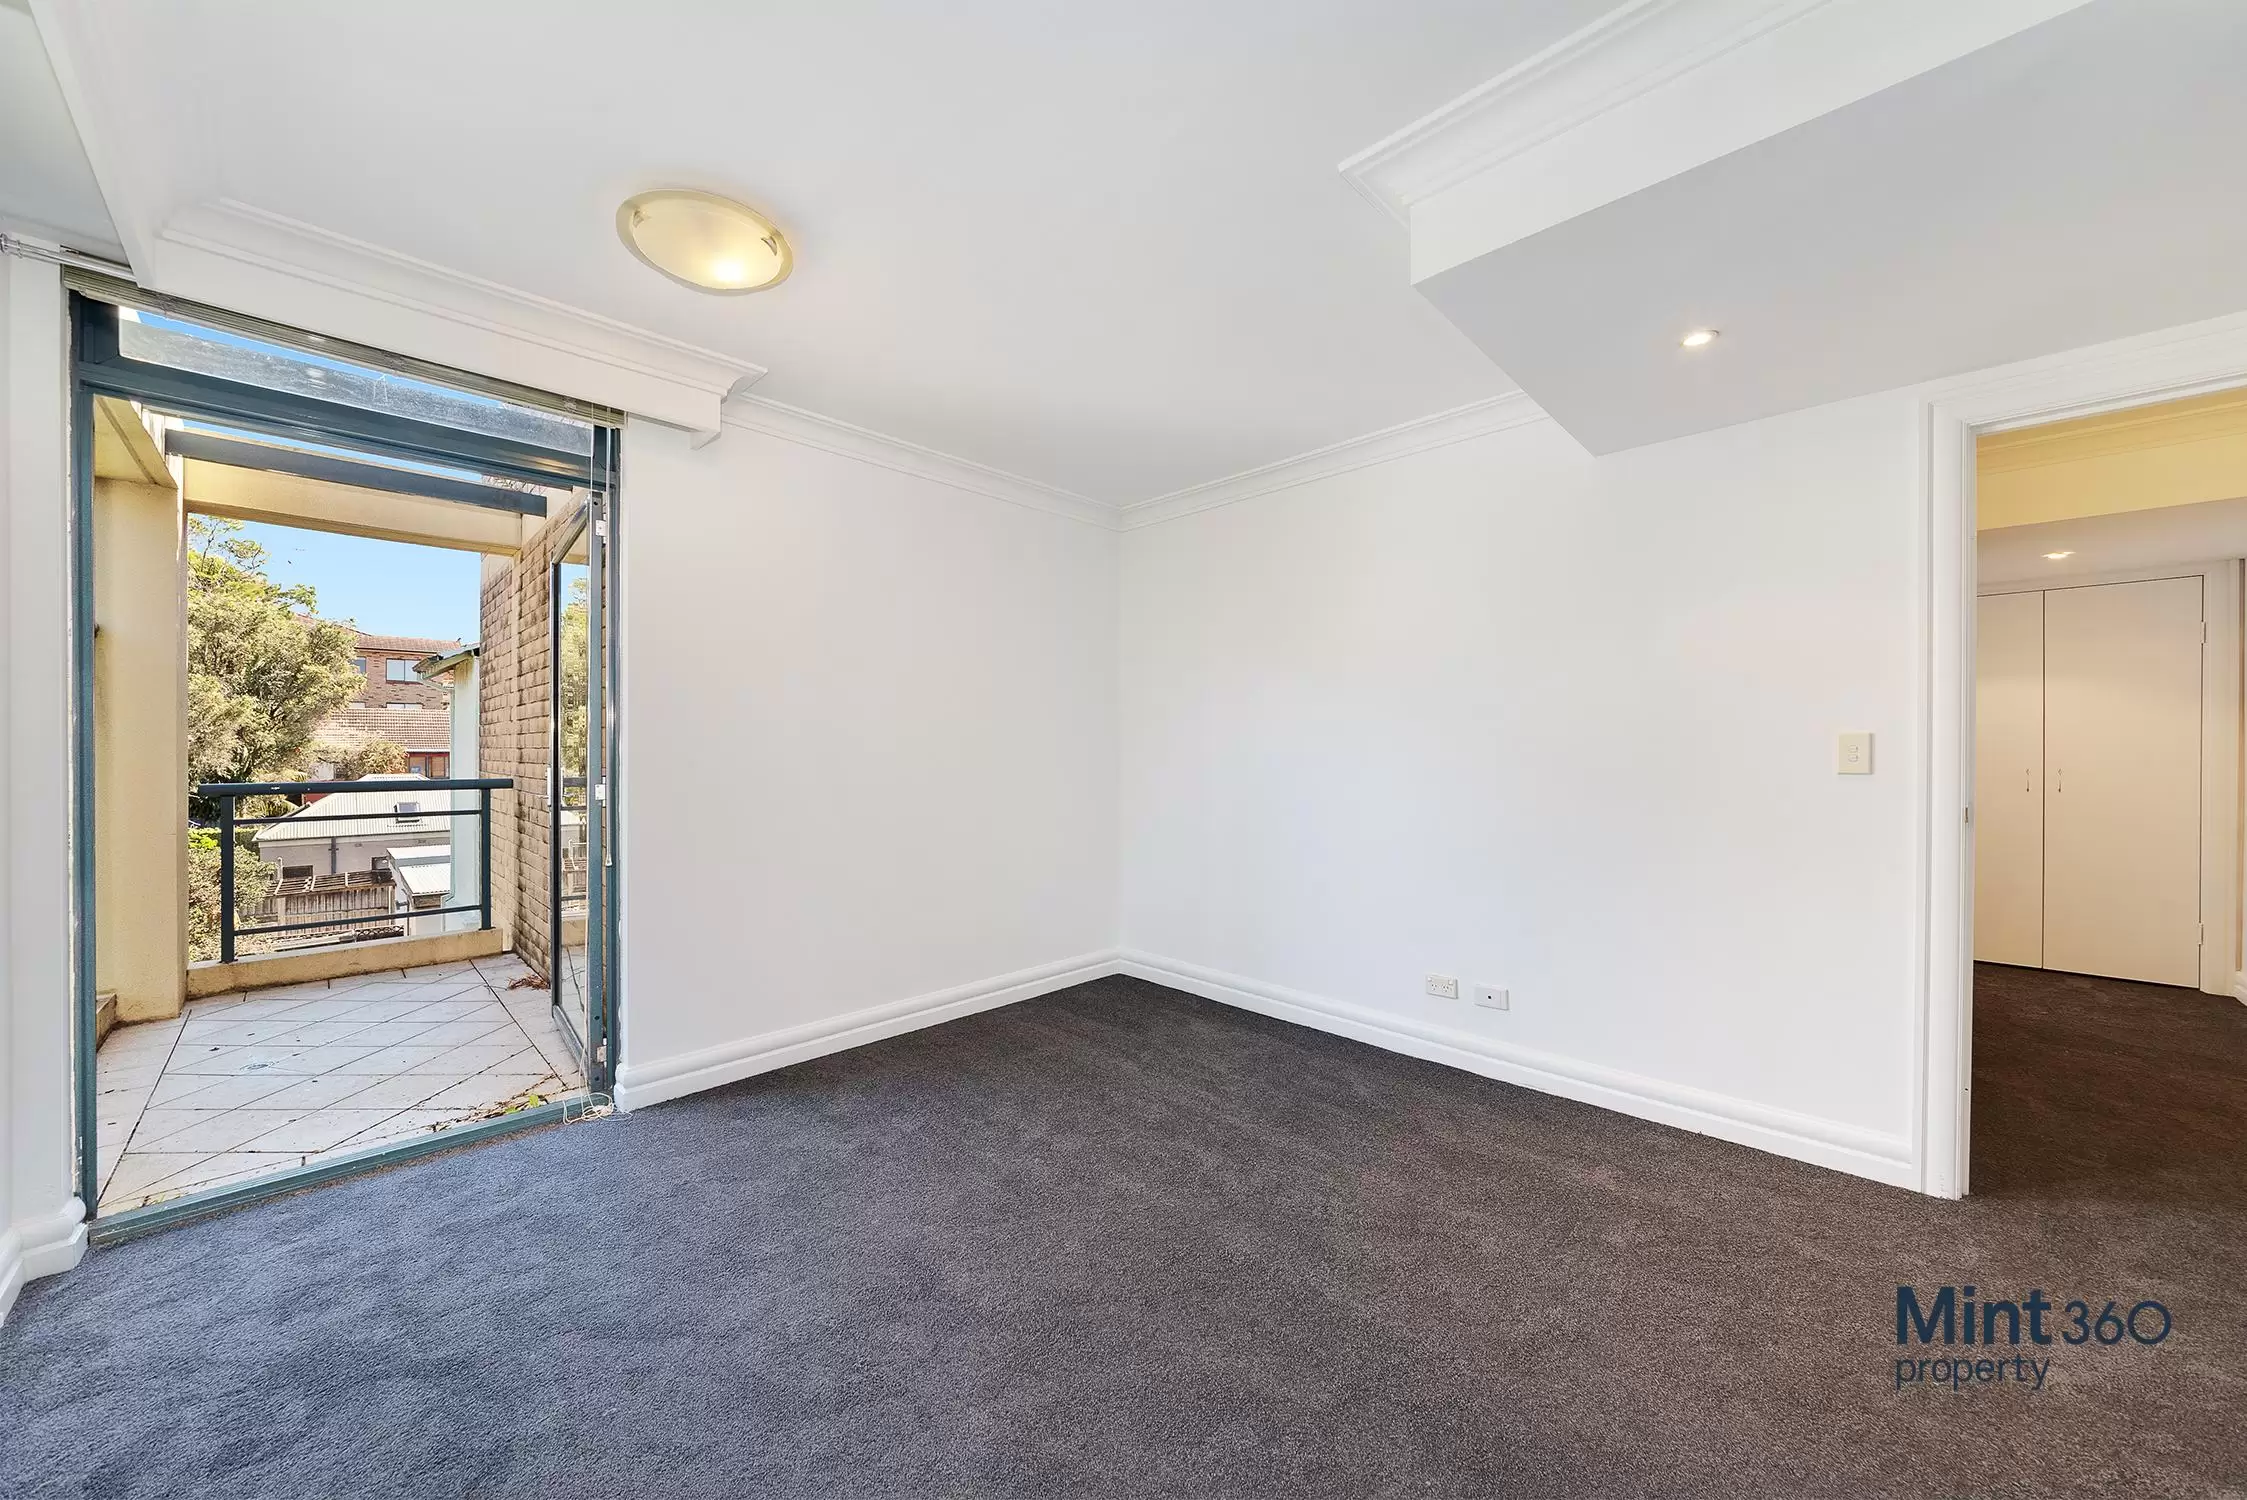 16/183 Coogee Bay Road, Coogee Leased by Raine & Horne Randwick | Coogee - image 3